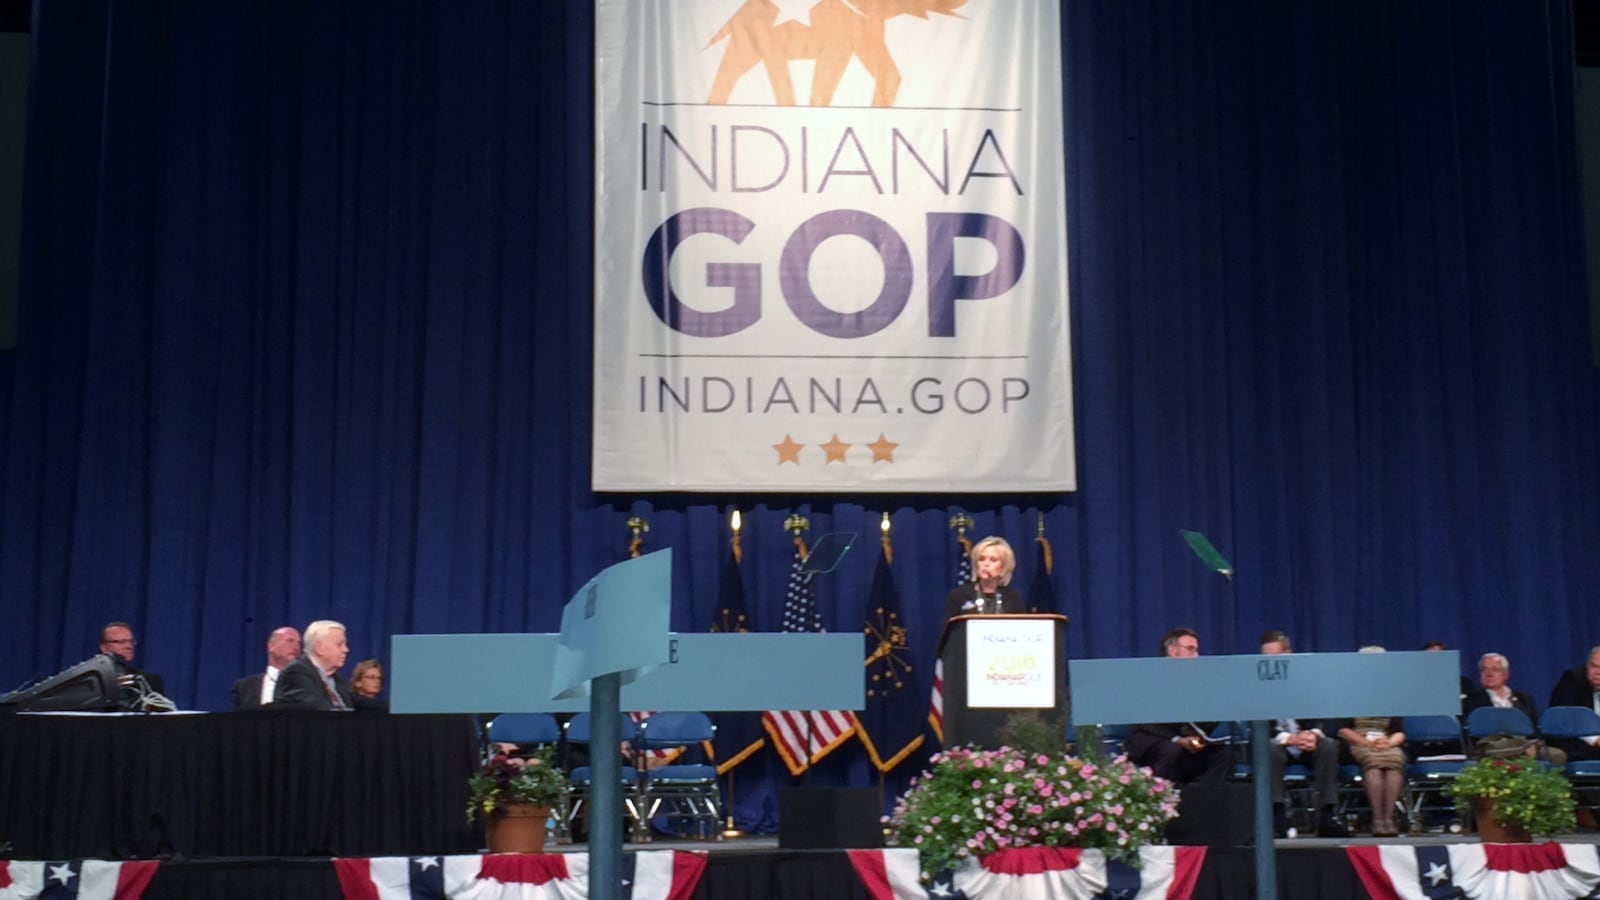 Yorktown superintendent Jennifer McCormick accepts the nomination for Indiana state superintendent at the Indiana GOP Convention.